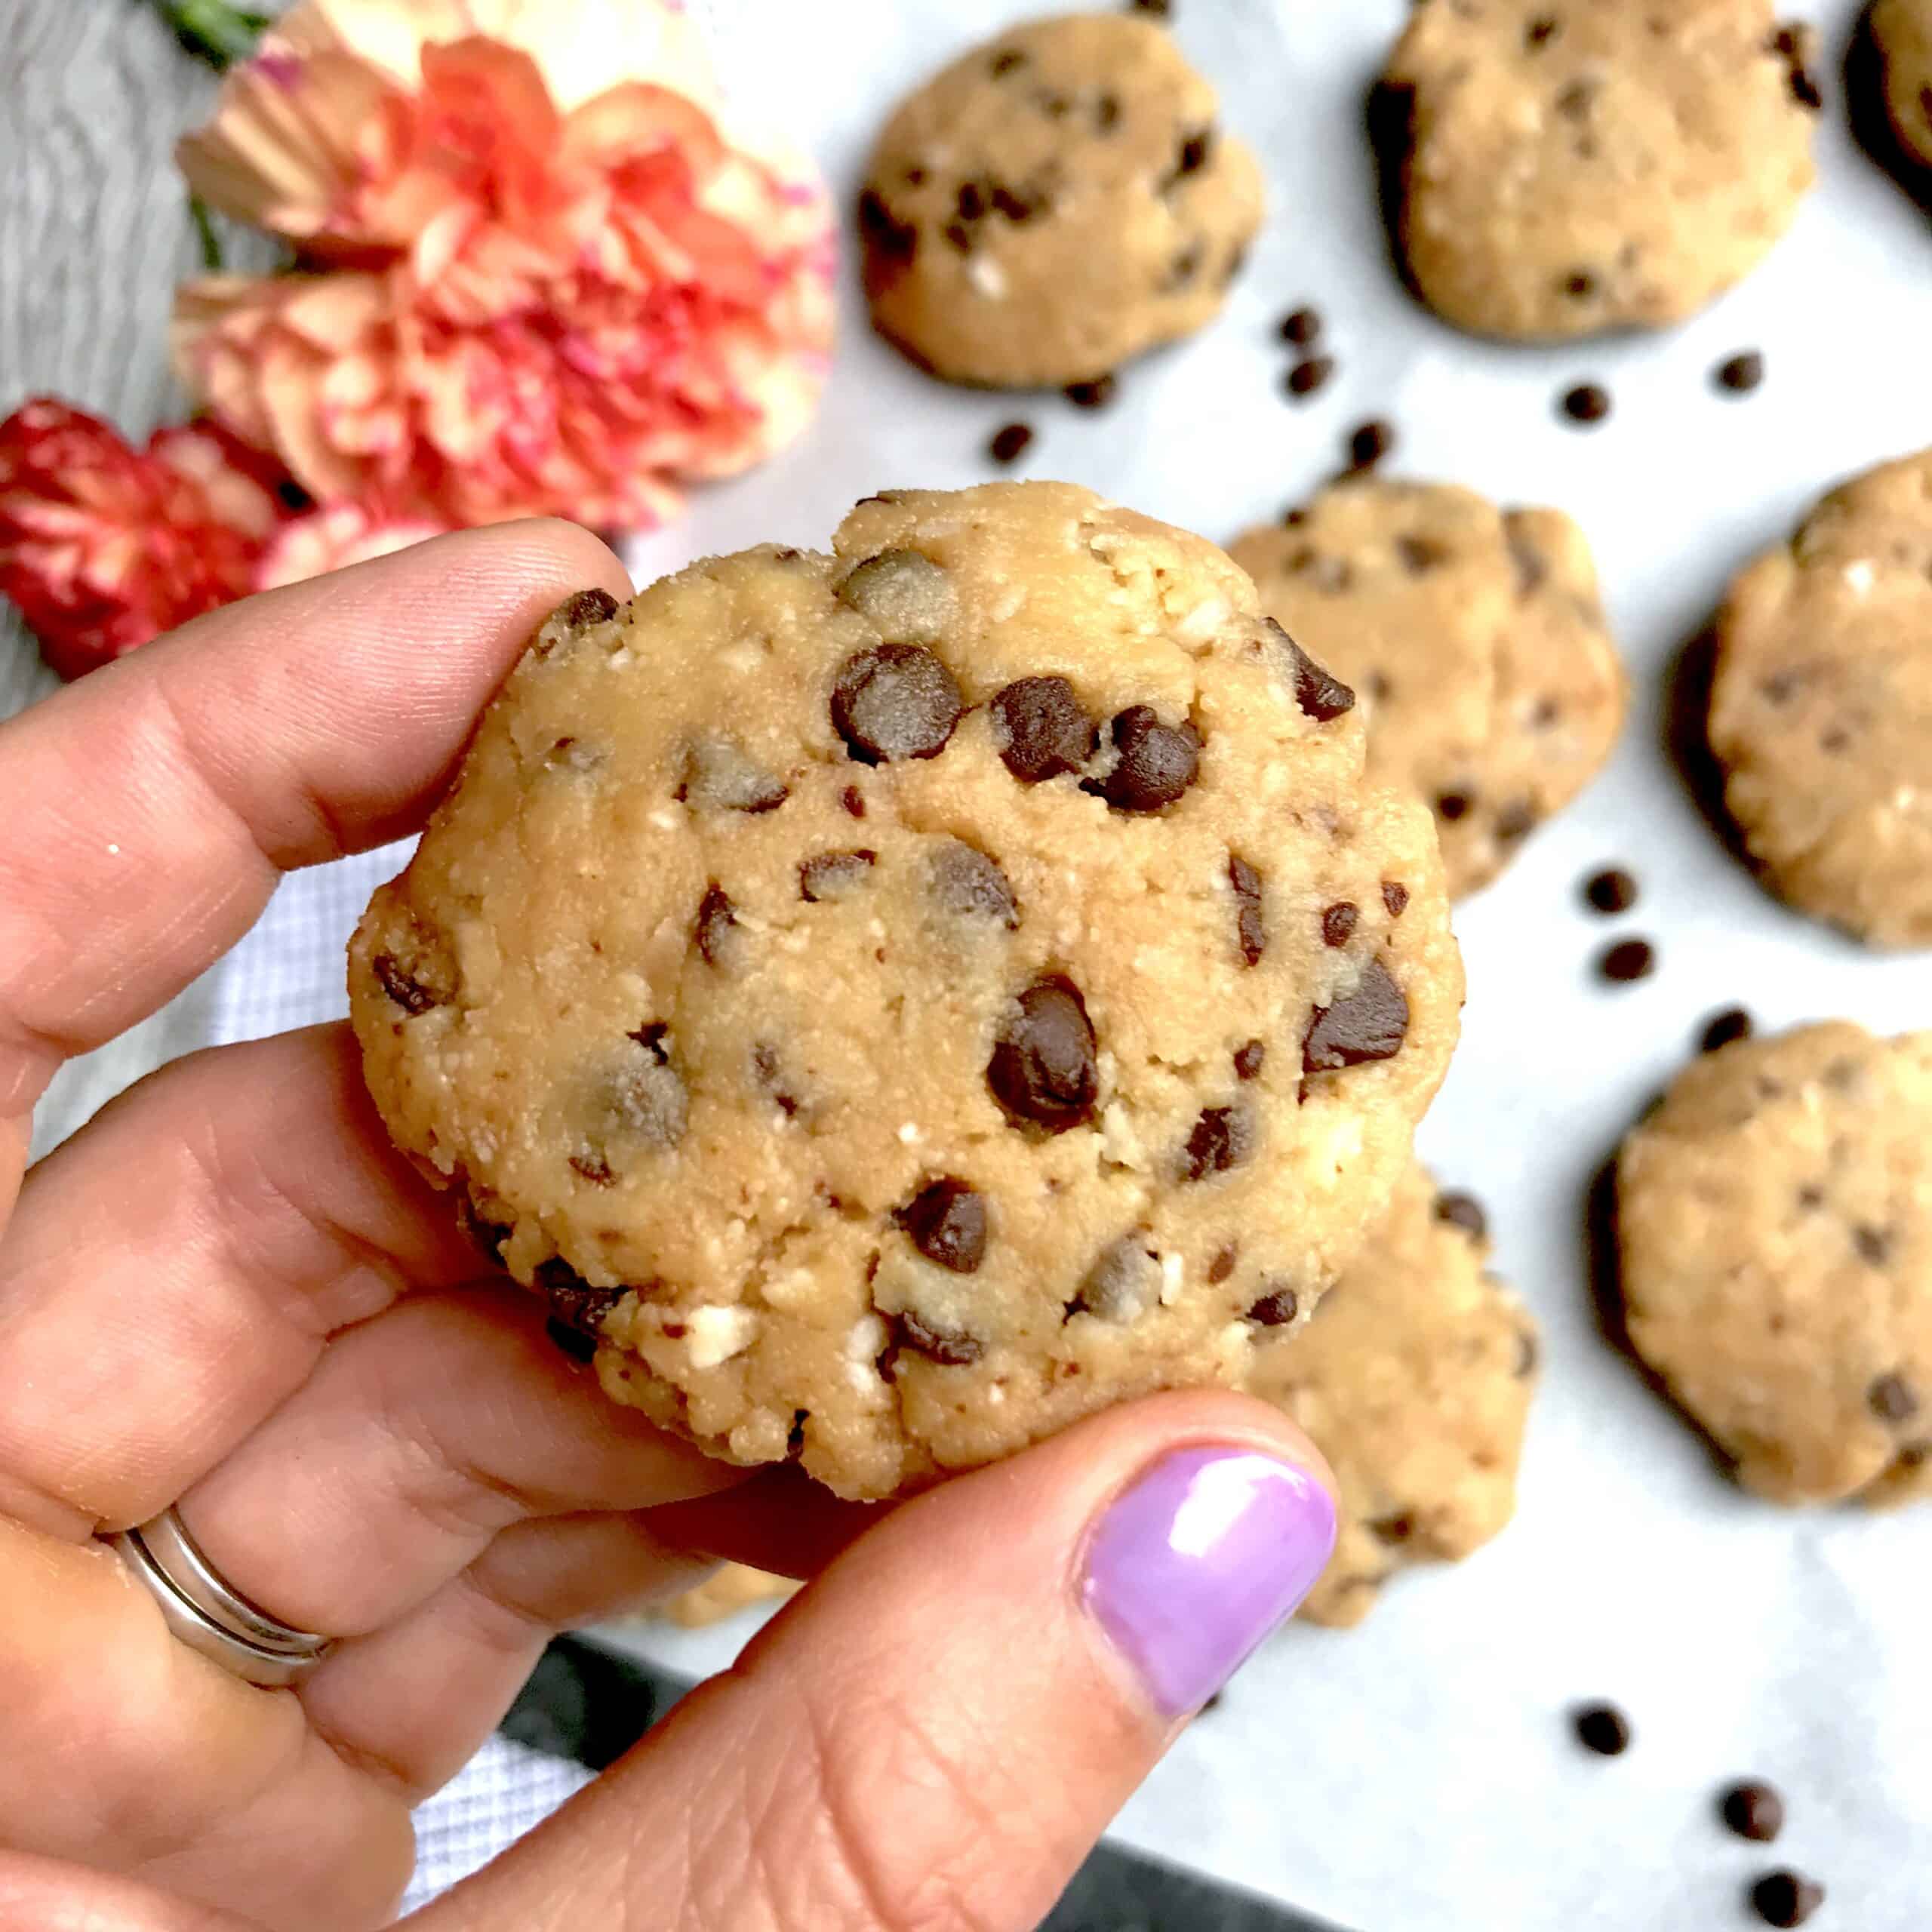 The cookies contain almond flour, shredded coconut, coconut butter, honey, and dairy-free chocolate chips. As a result, the combination of flavors reminds me of an Almond Joy candy bar. Mmm!